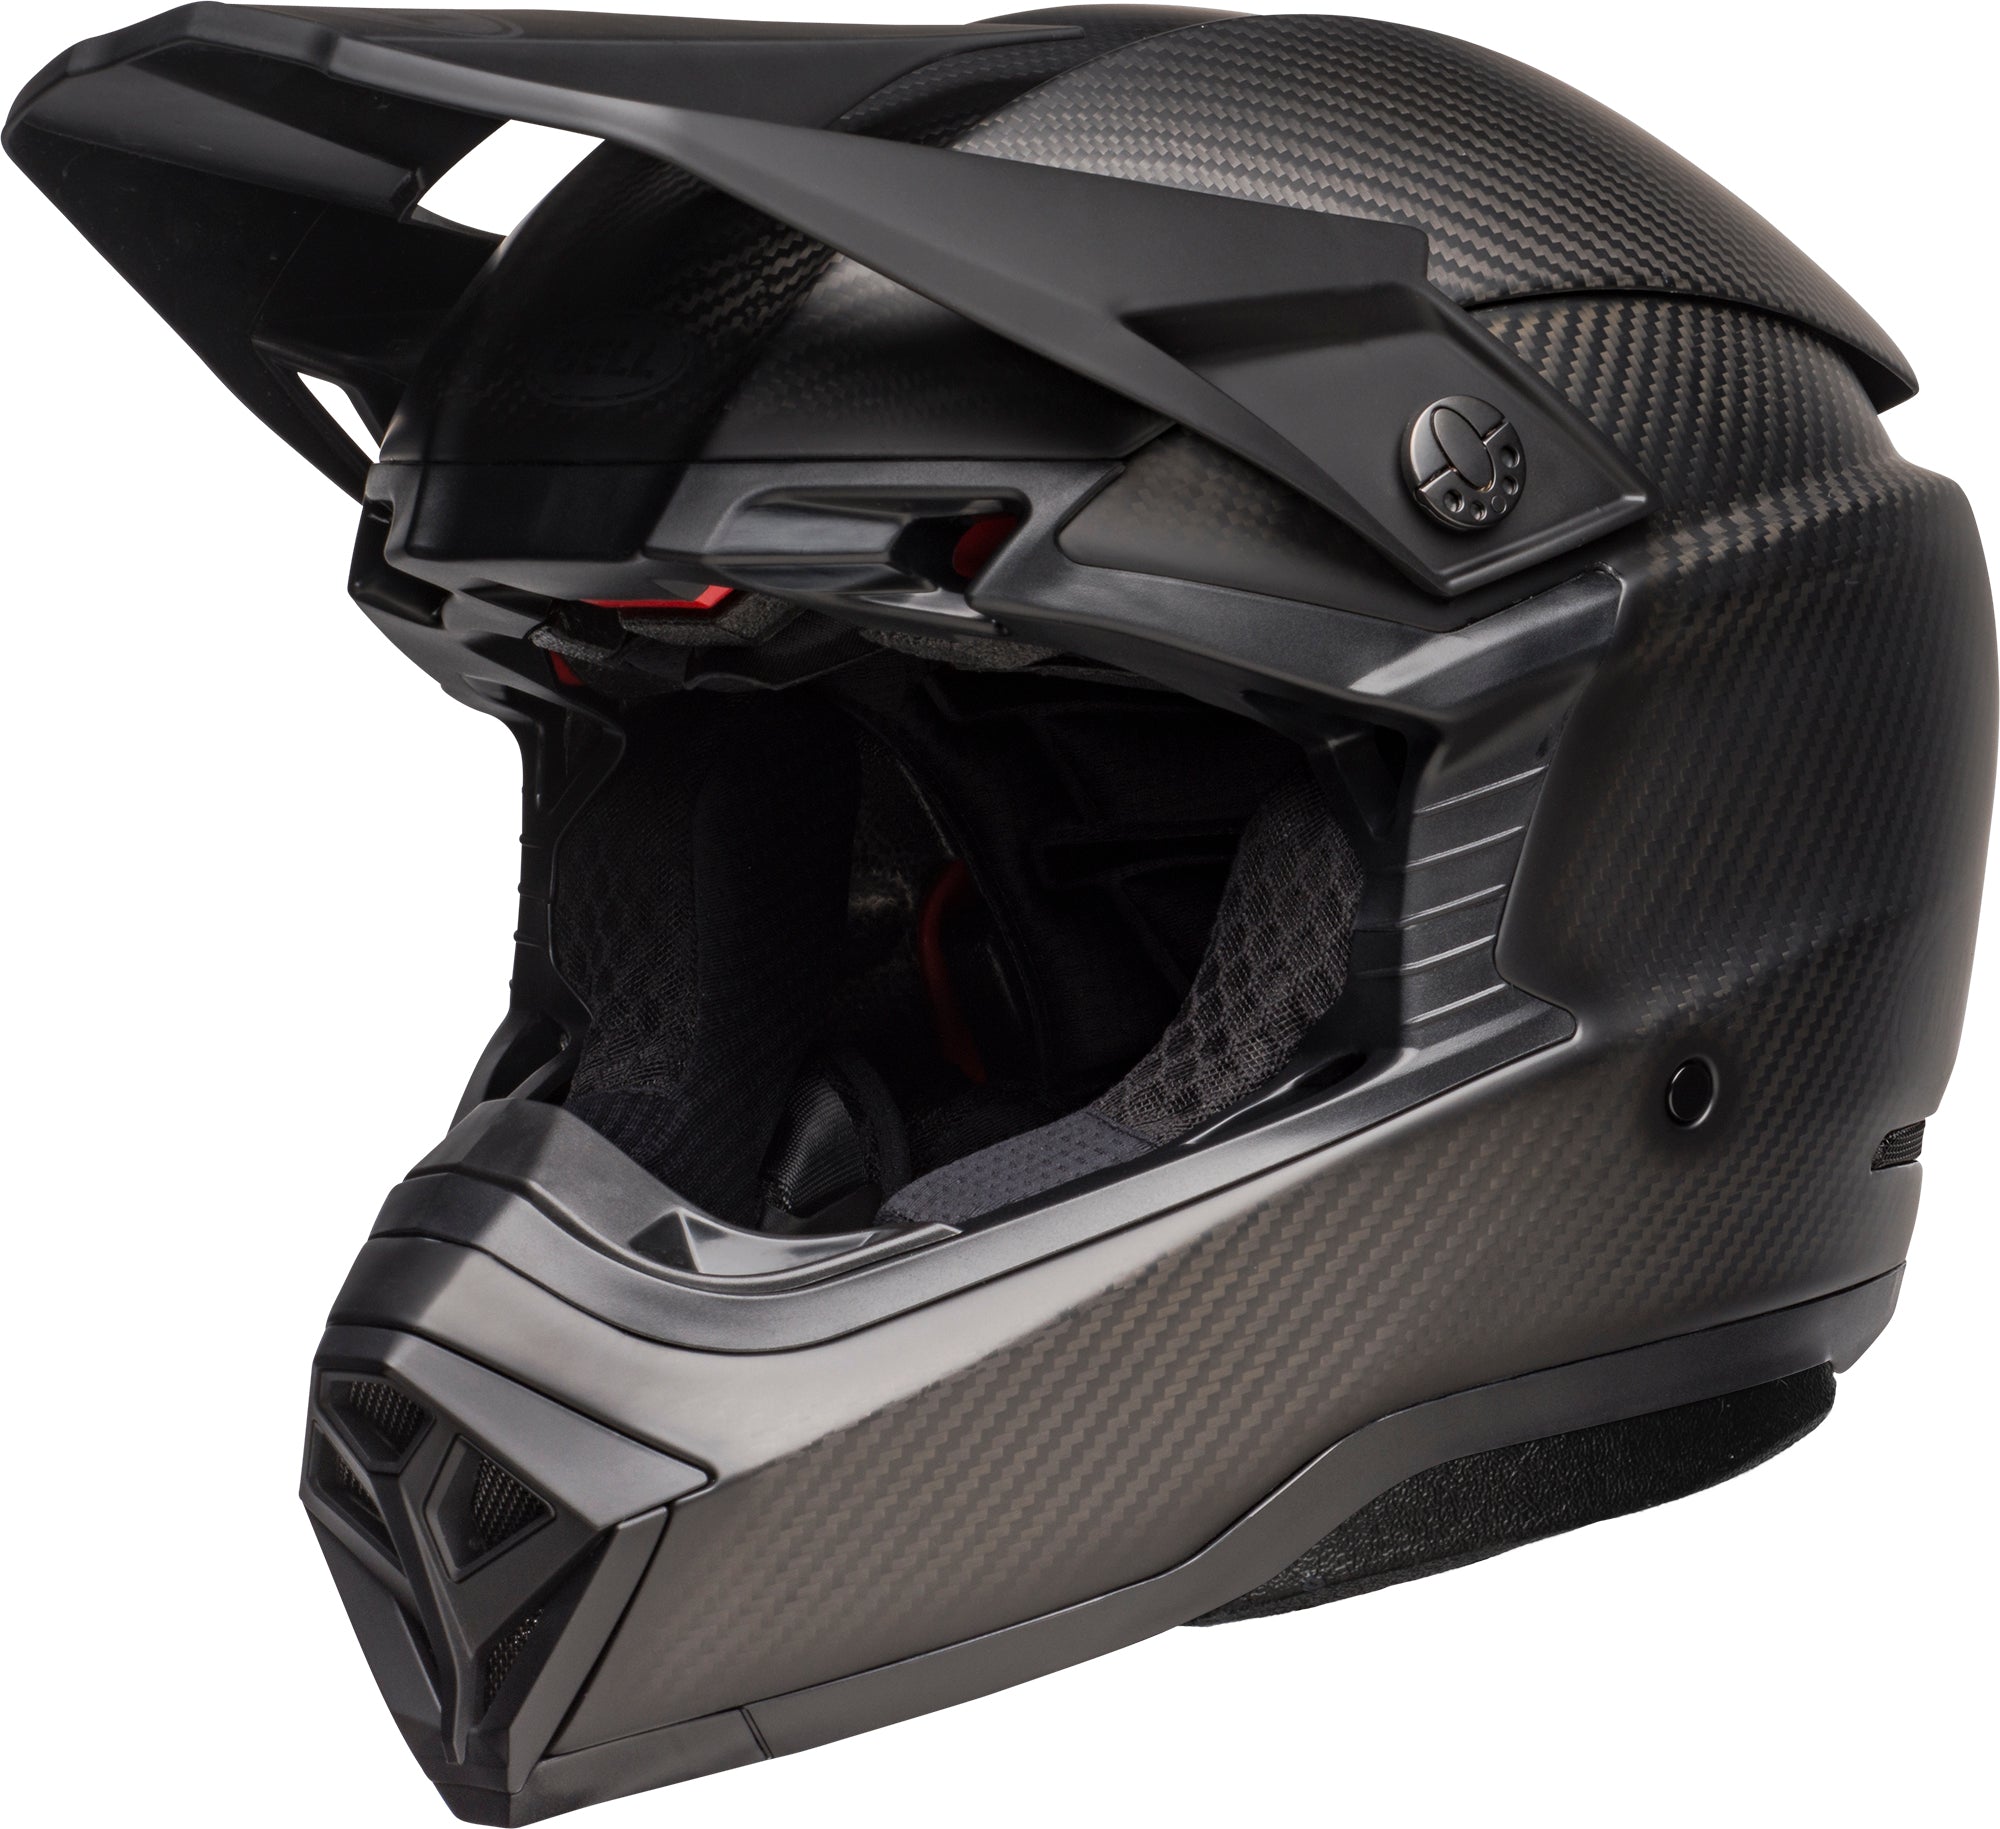 Bell MX 2023 Moto-10 Spherical MIPS Adult Helmet in Matte Black Carbon, angled view showing detailed design and features